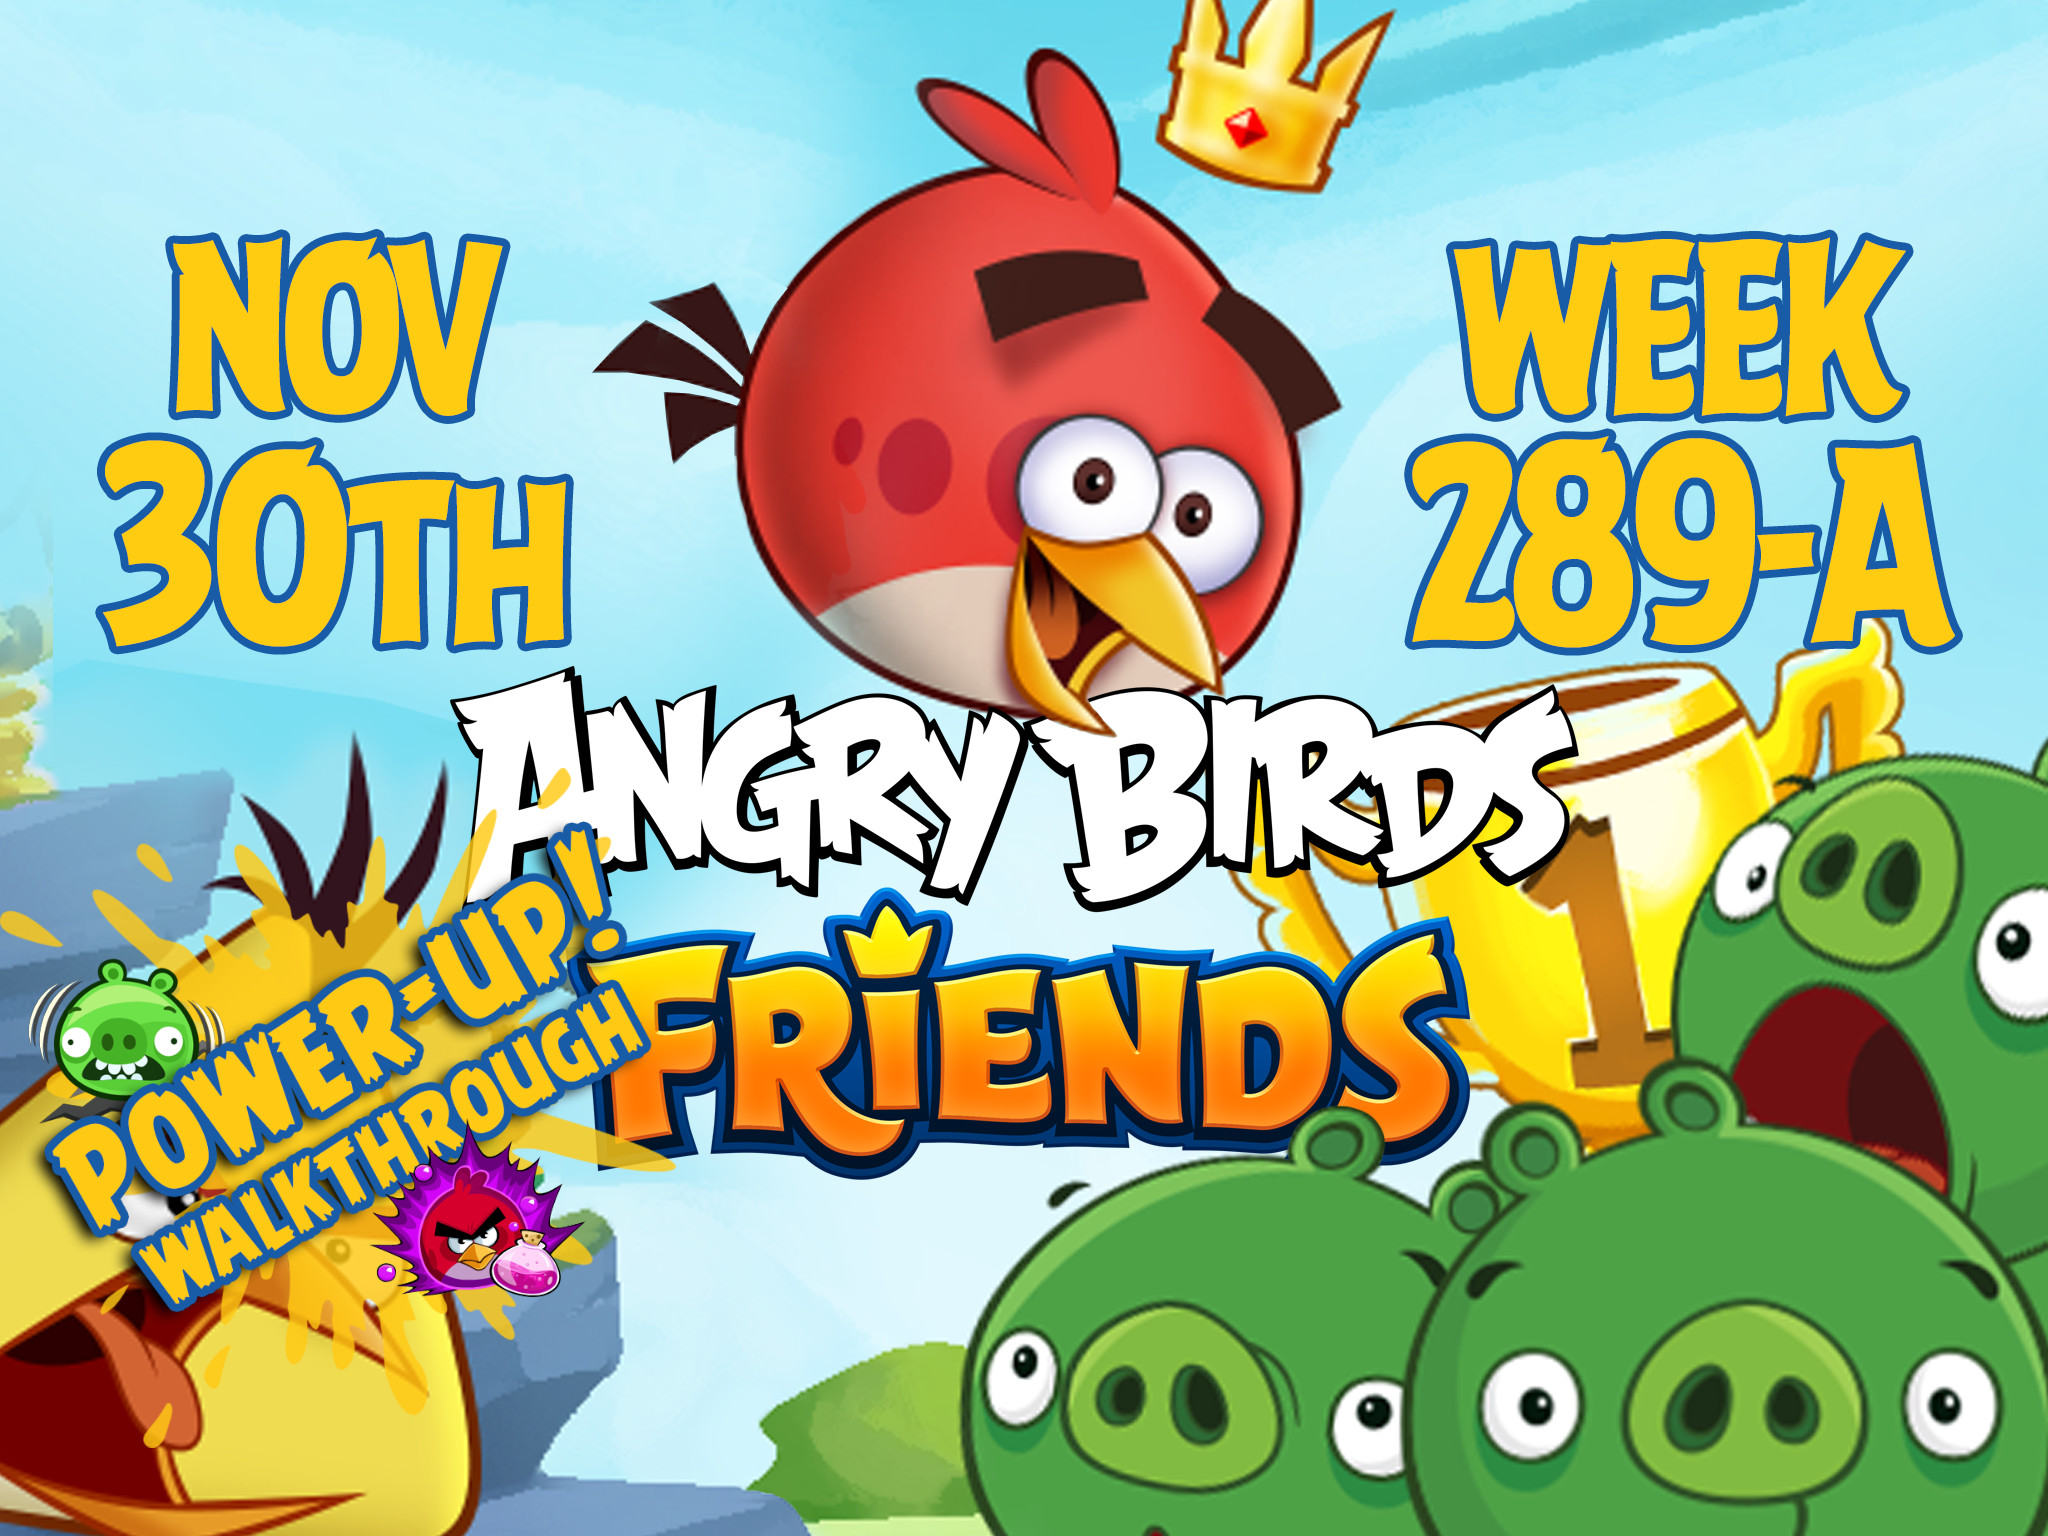 Angry Birds Friends Tournament Week 289-A Feature Image PU